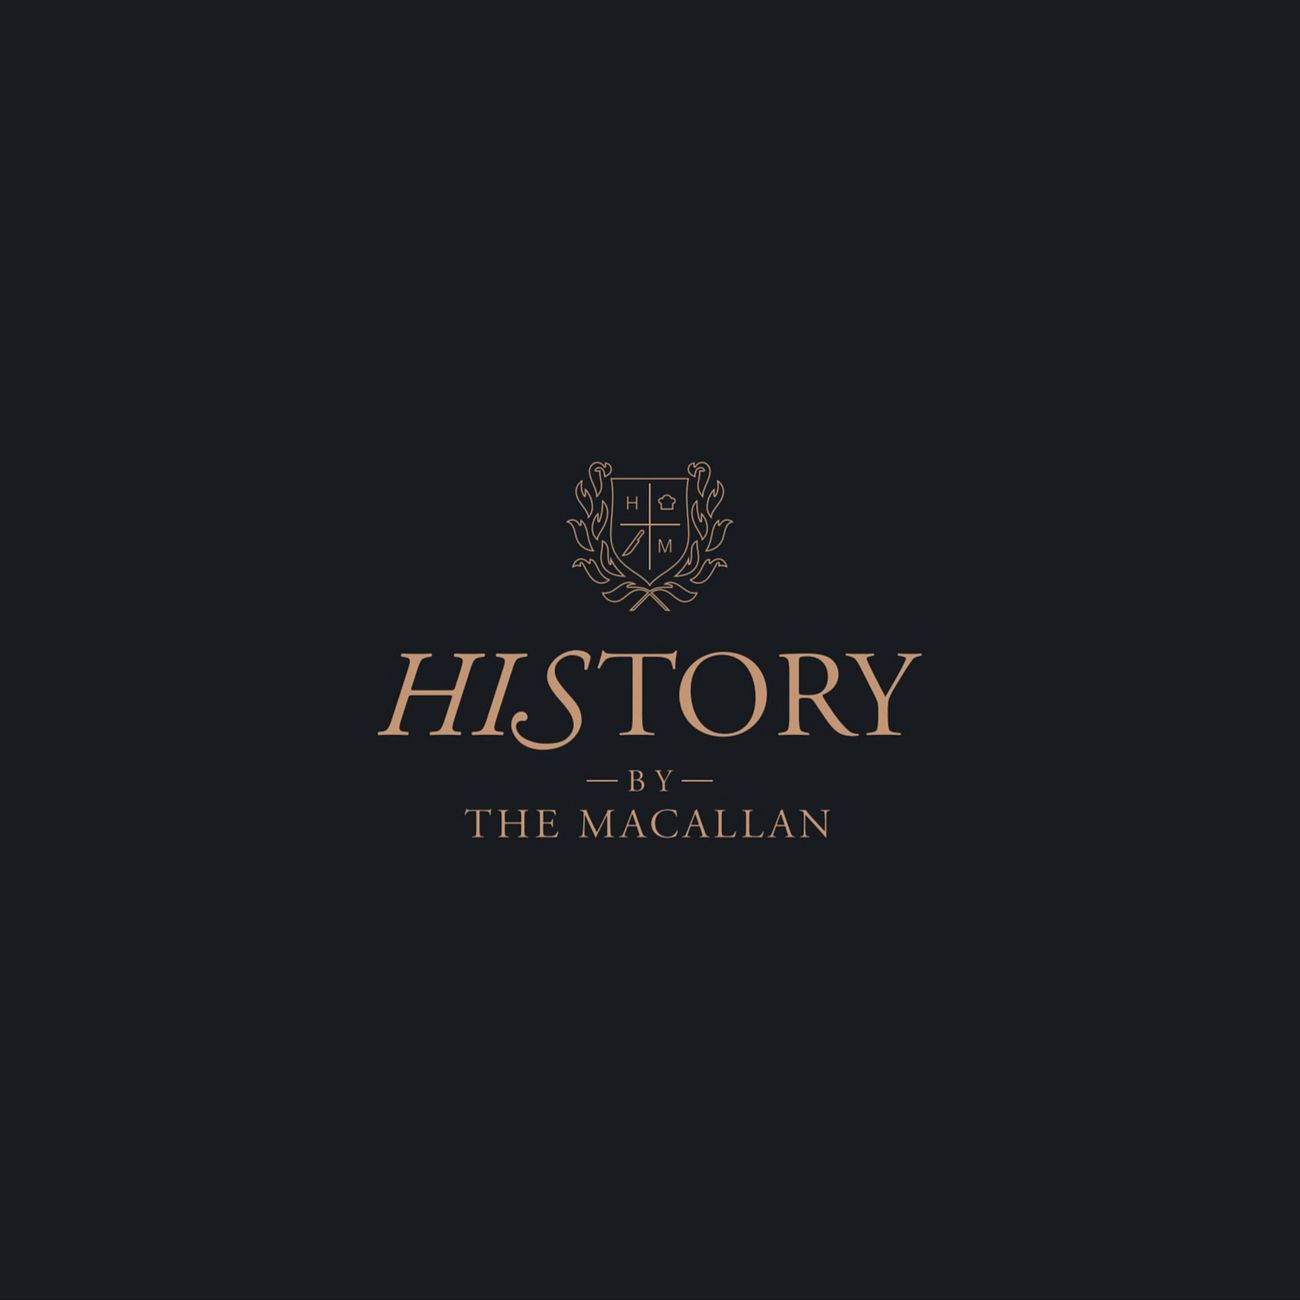 History by The Macallan